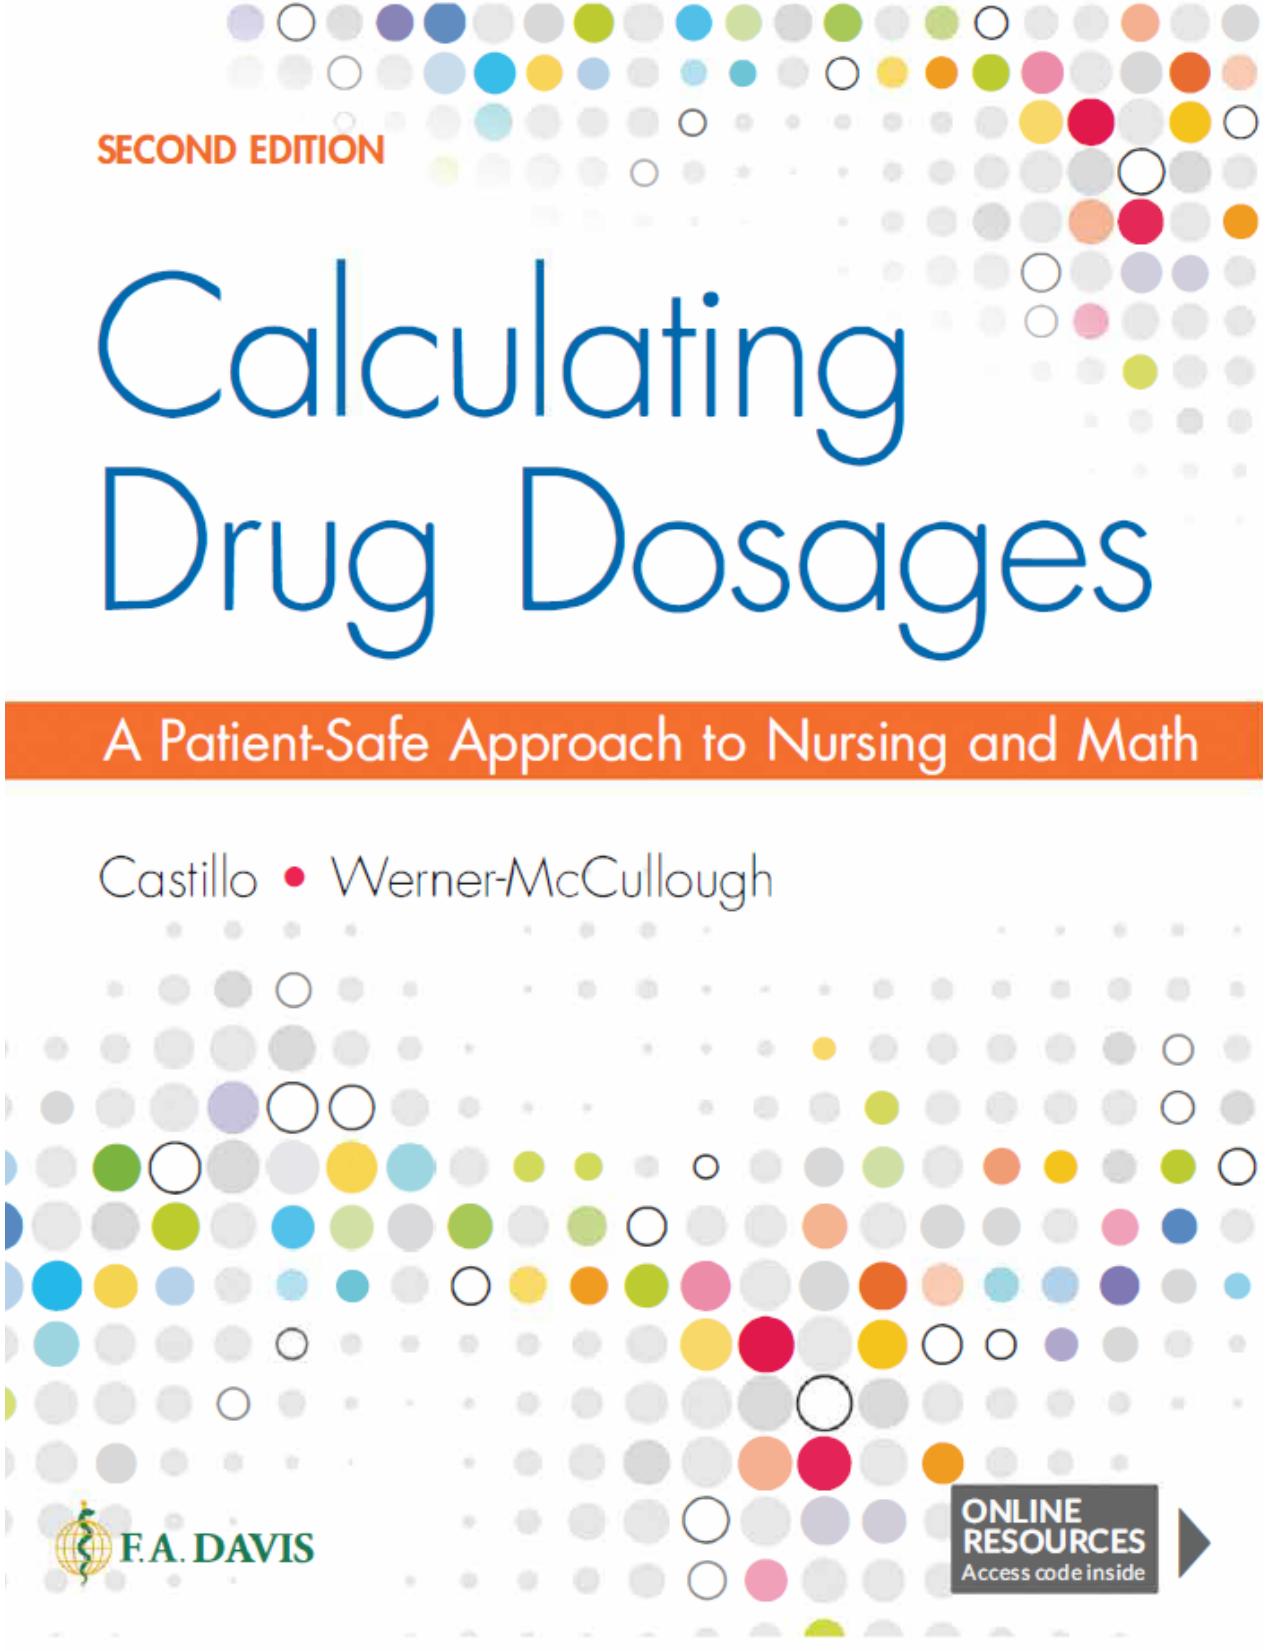 Calculating Drug Dosages  A Patient-Safe Approach to Nursing and Math (2020)